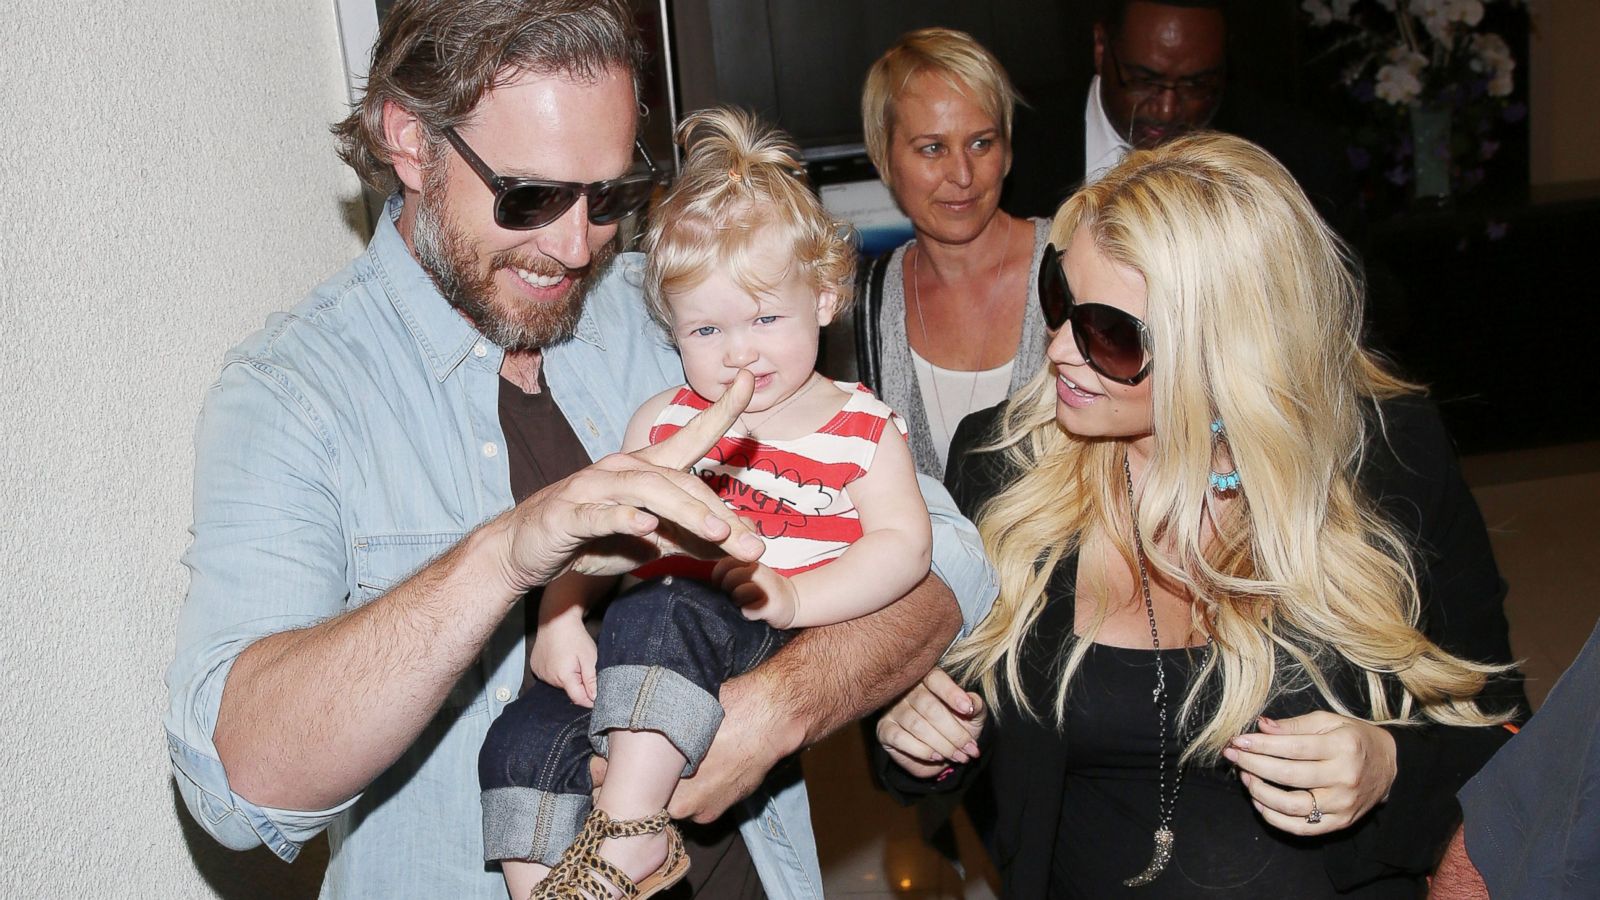 Jessica Simpson arriving at New York's JFK Airport from Los